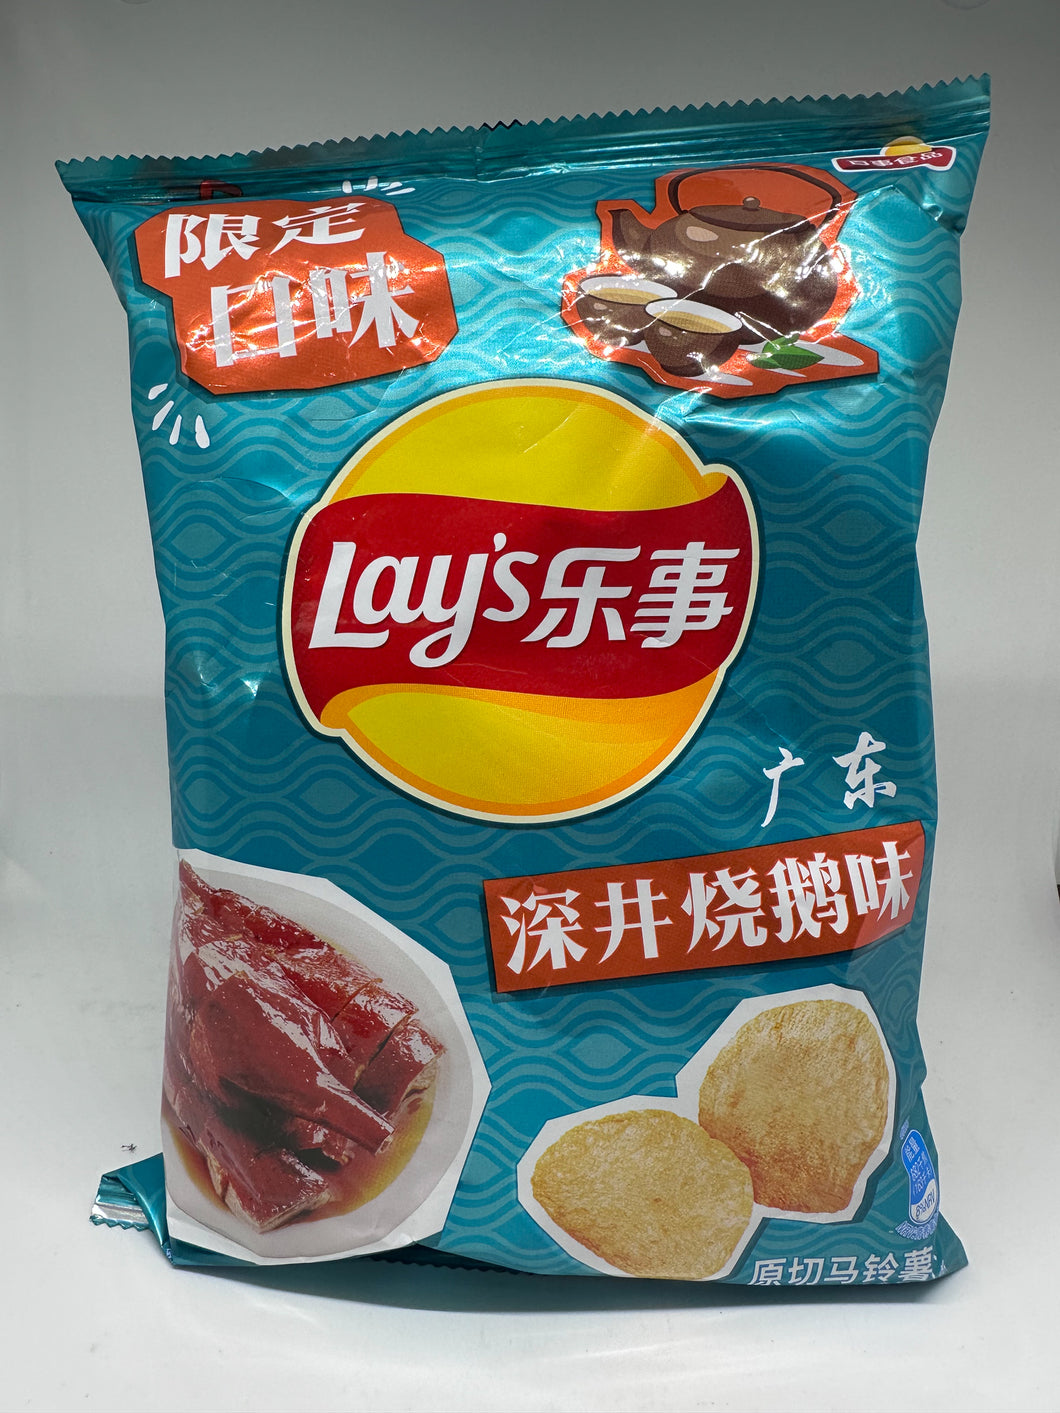 Roasted Goose Flavored Chips by Lays